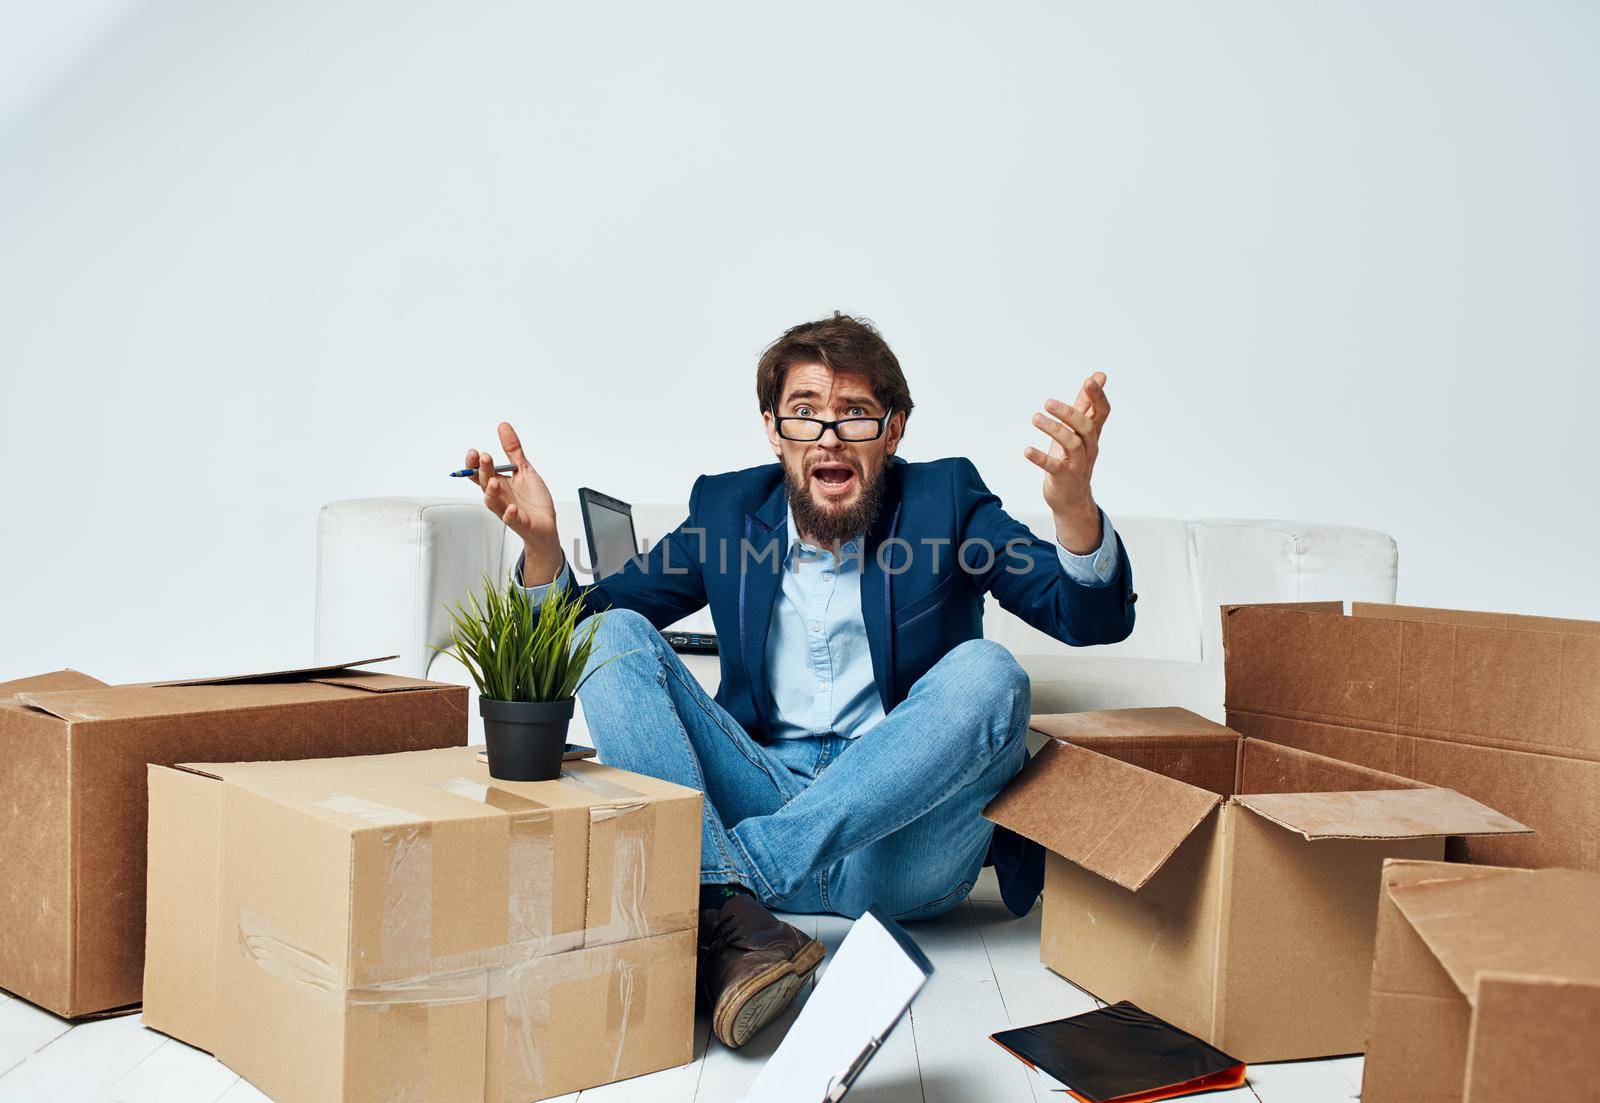 Emotional Man sits on the floor next to boxes unpacking a move Professional by SHOTPRIME